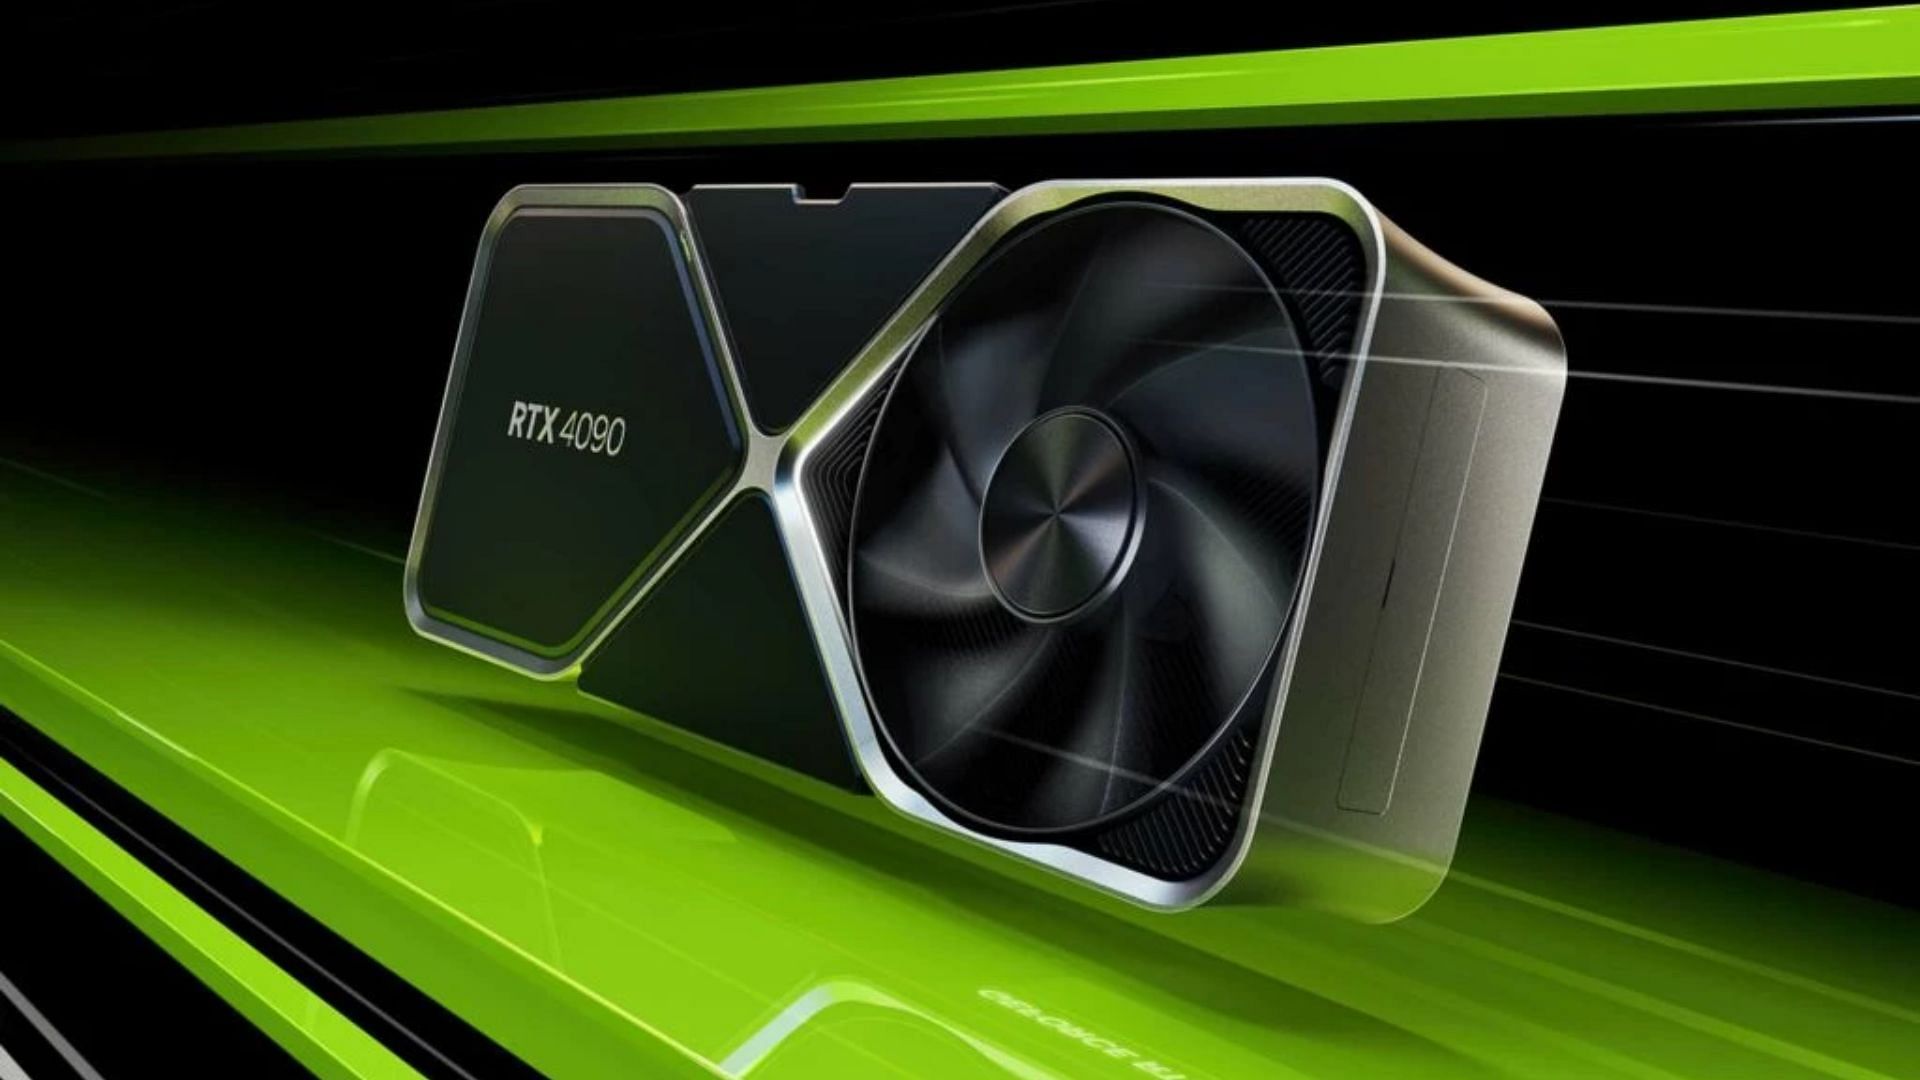 The Nvidia Geforce RTX 40 series cards are built for gaming (Image via Nvidia)